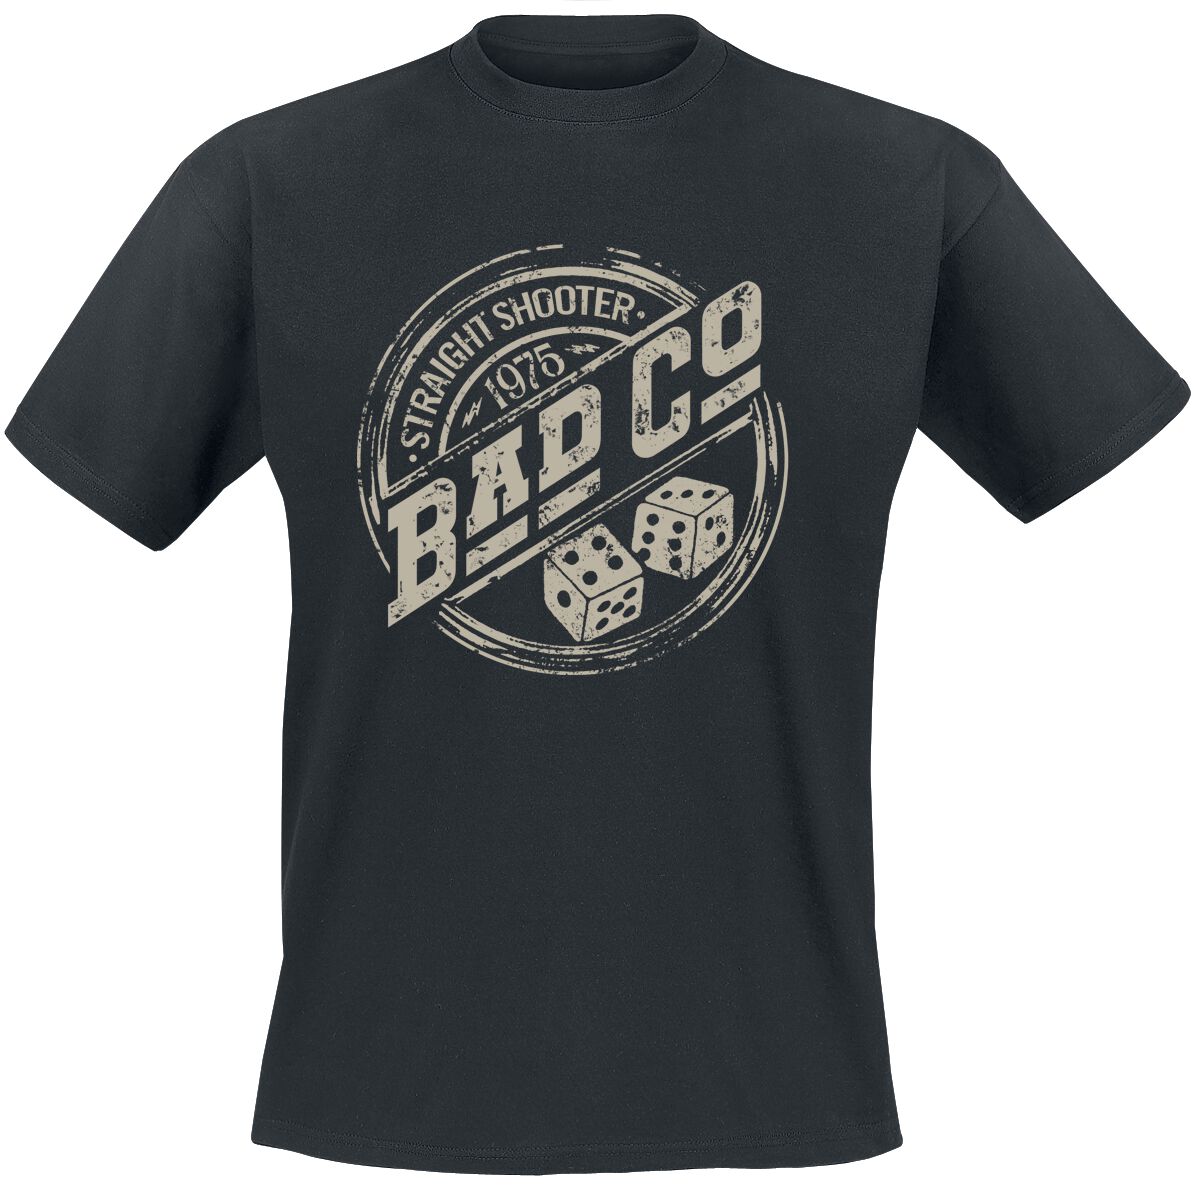 Bad Company Straight Shooter T-Shirt schwarz in M